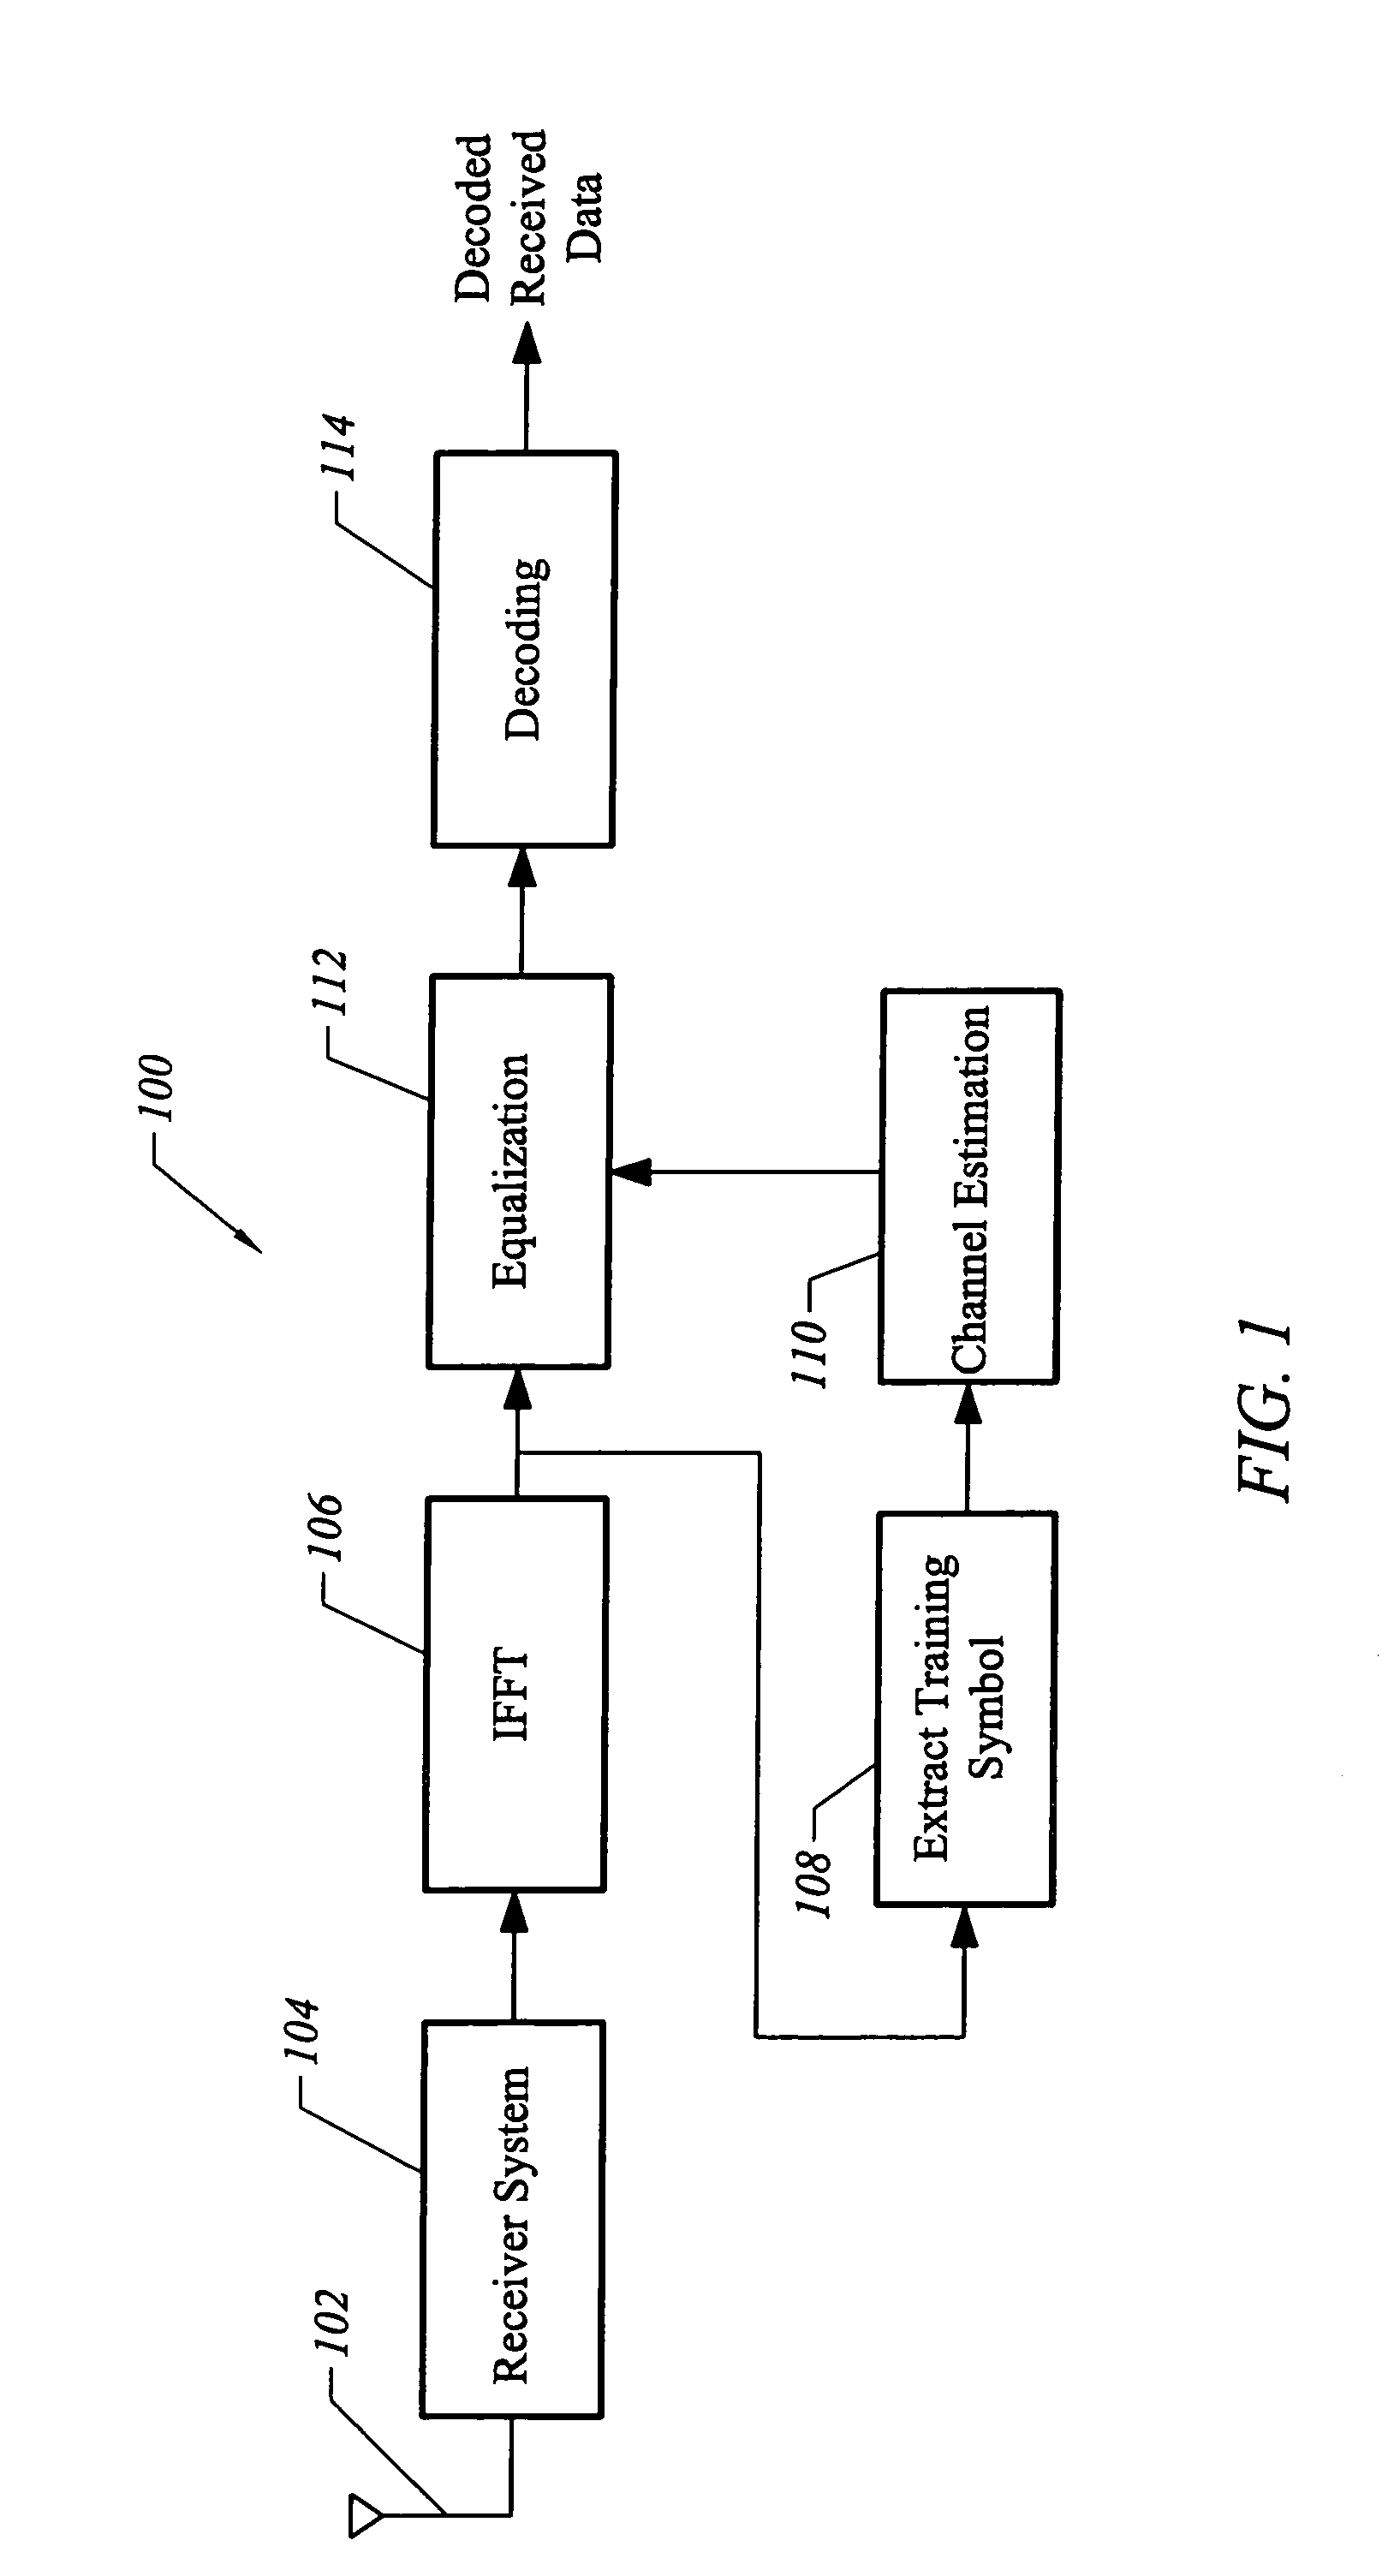 OFDM channel estimation in the presence of interference